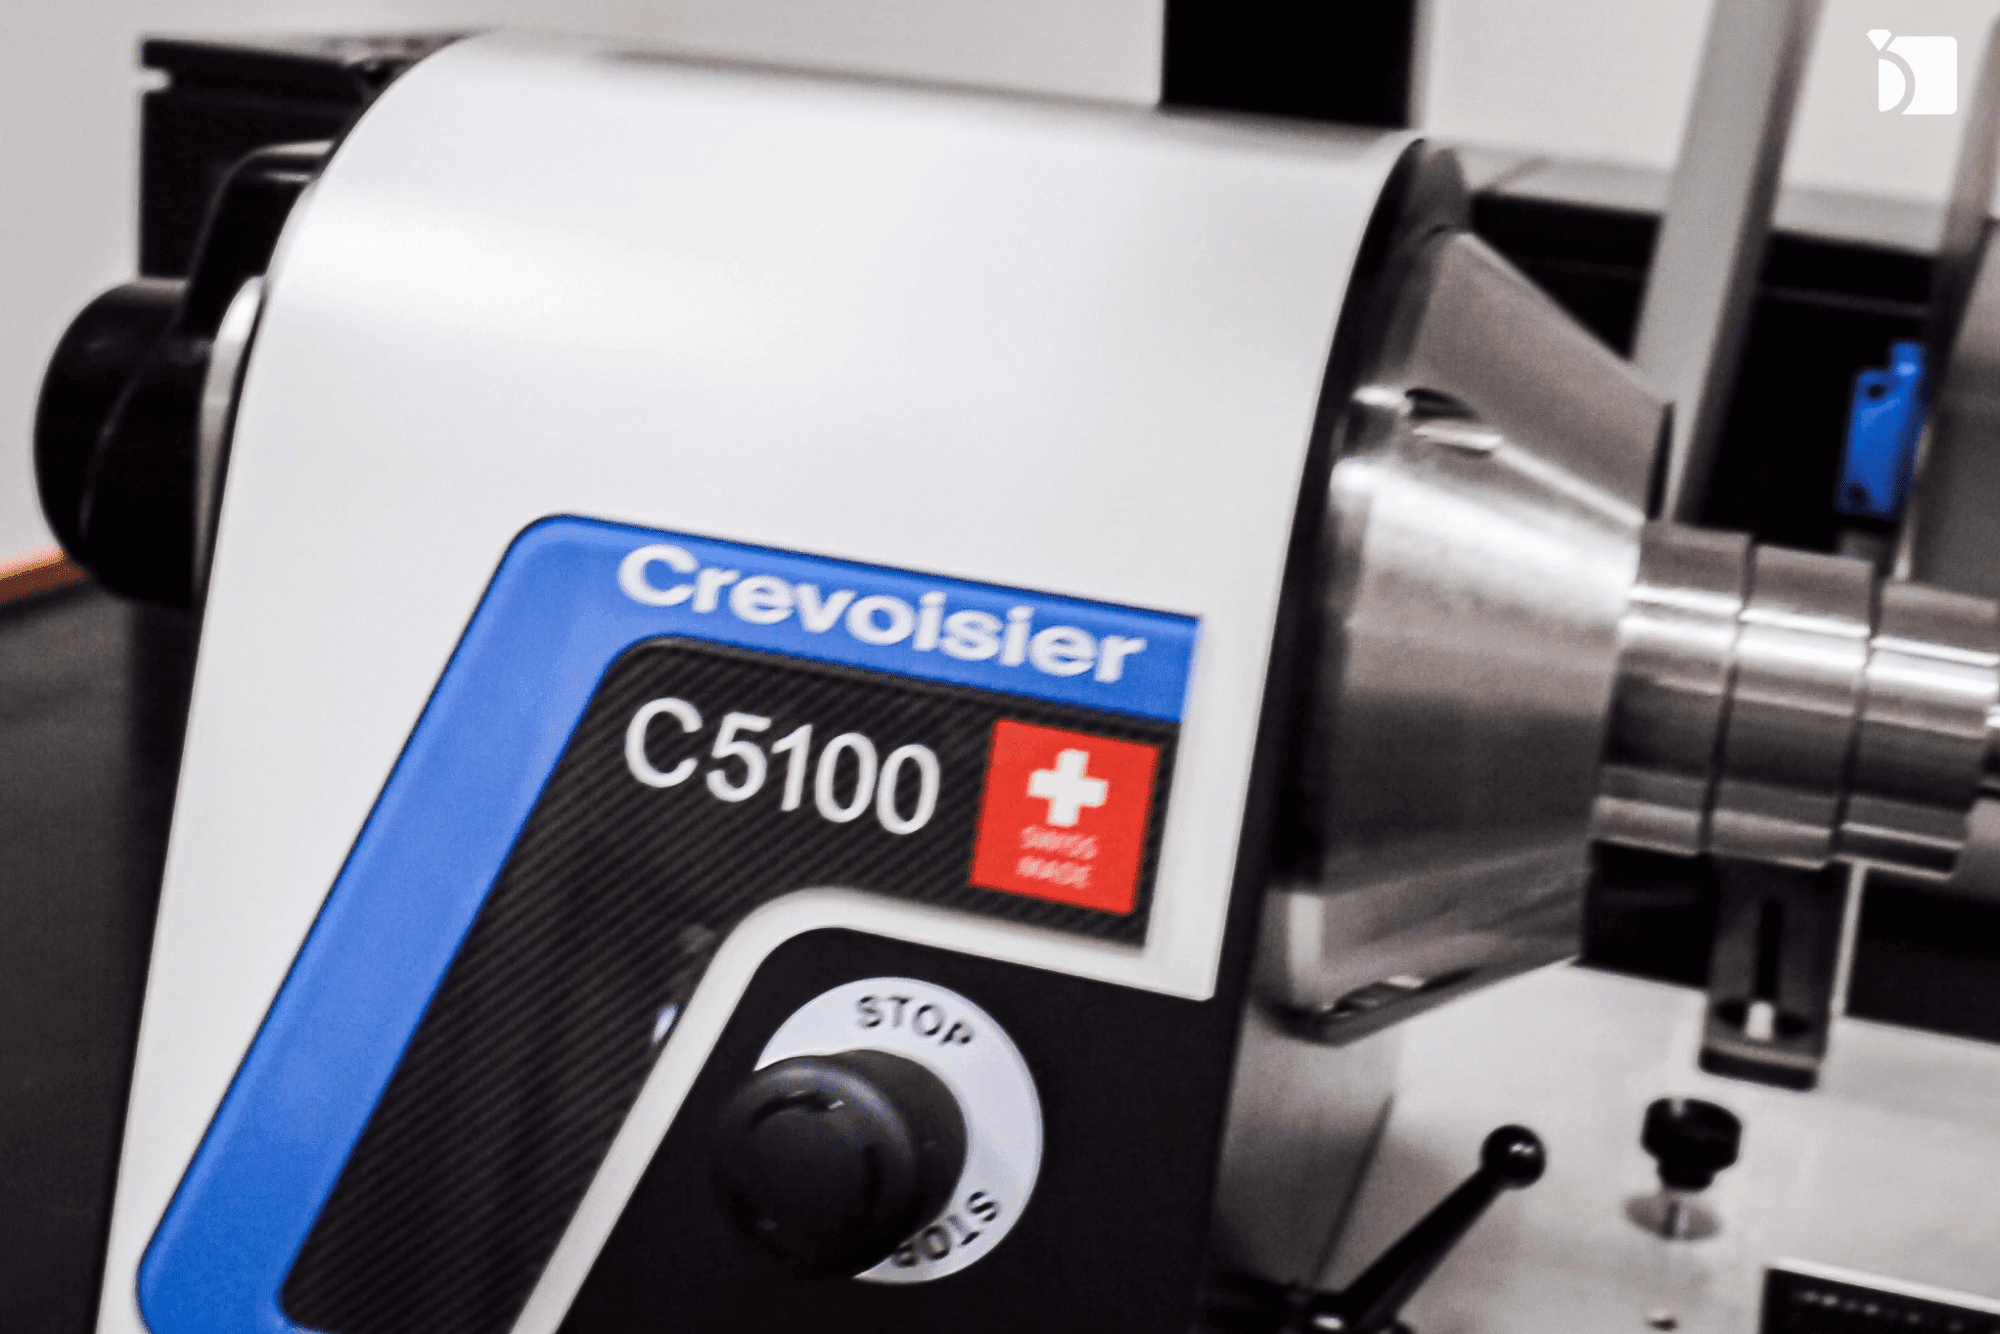 Image Showcasing the Creovoisier Machine in the Watch Repair Service Center